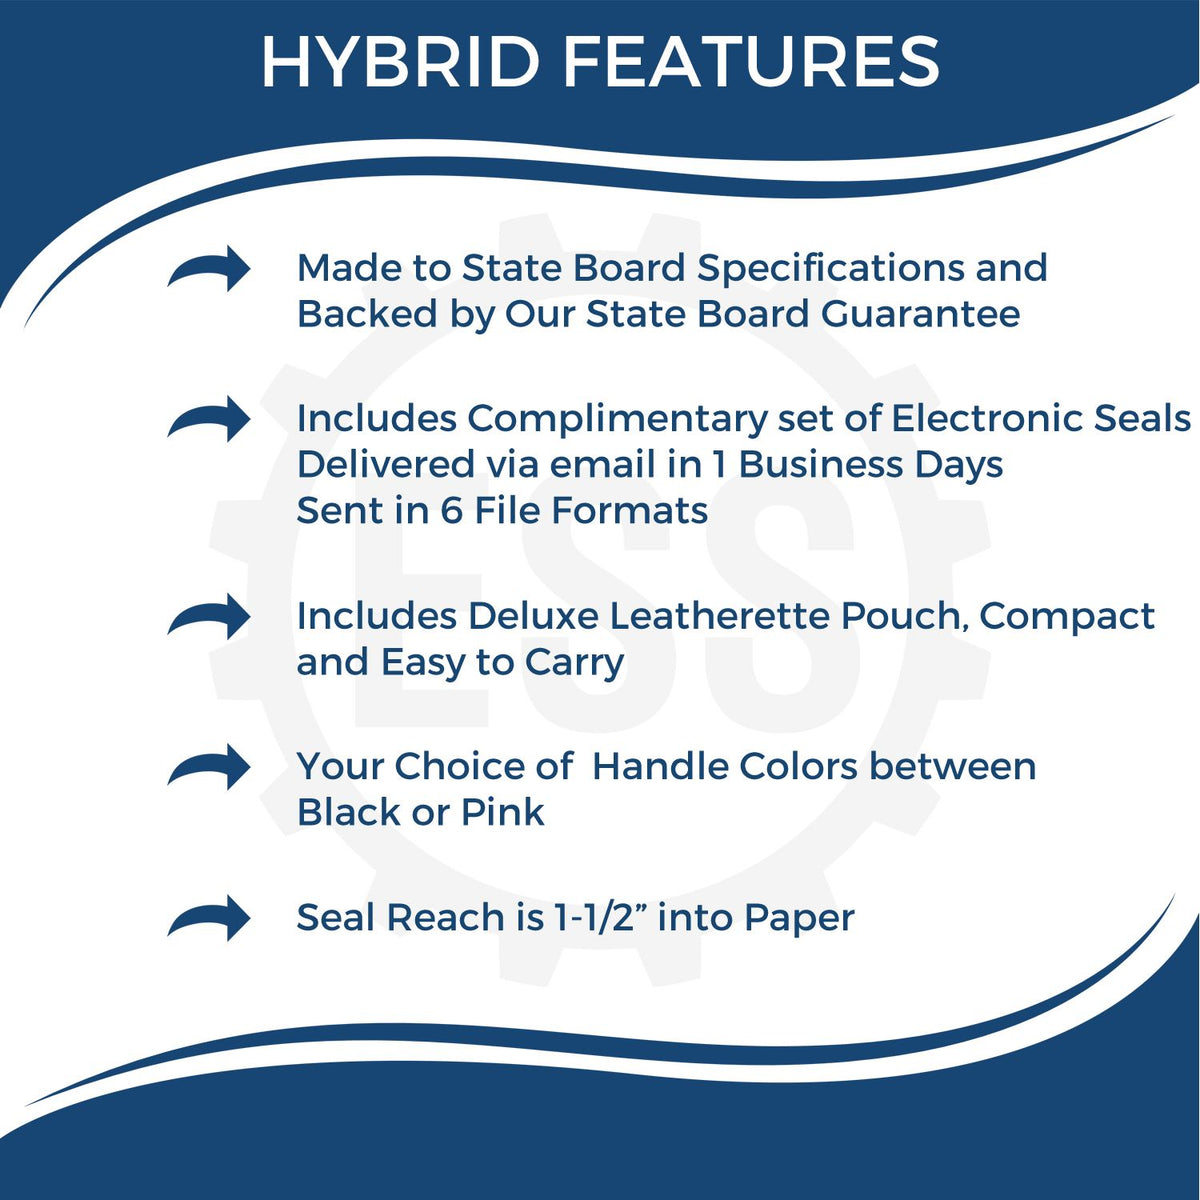 A picture of an infographic highlighting the selling points for the Hybrid Connecticut Architect Seal